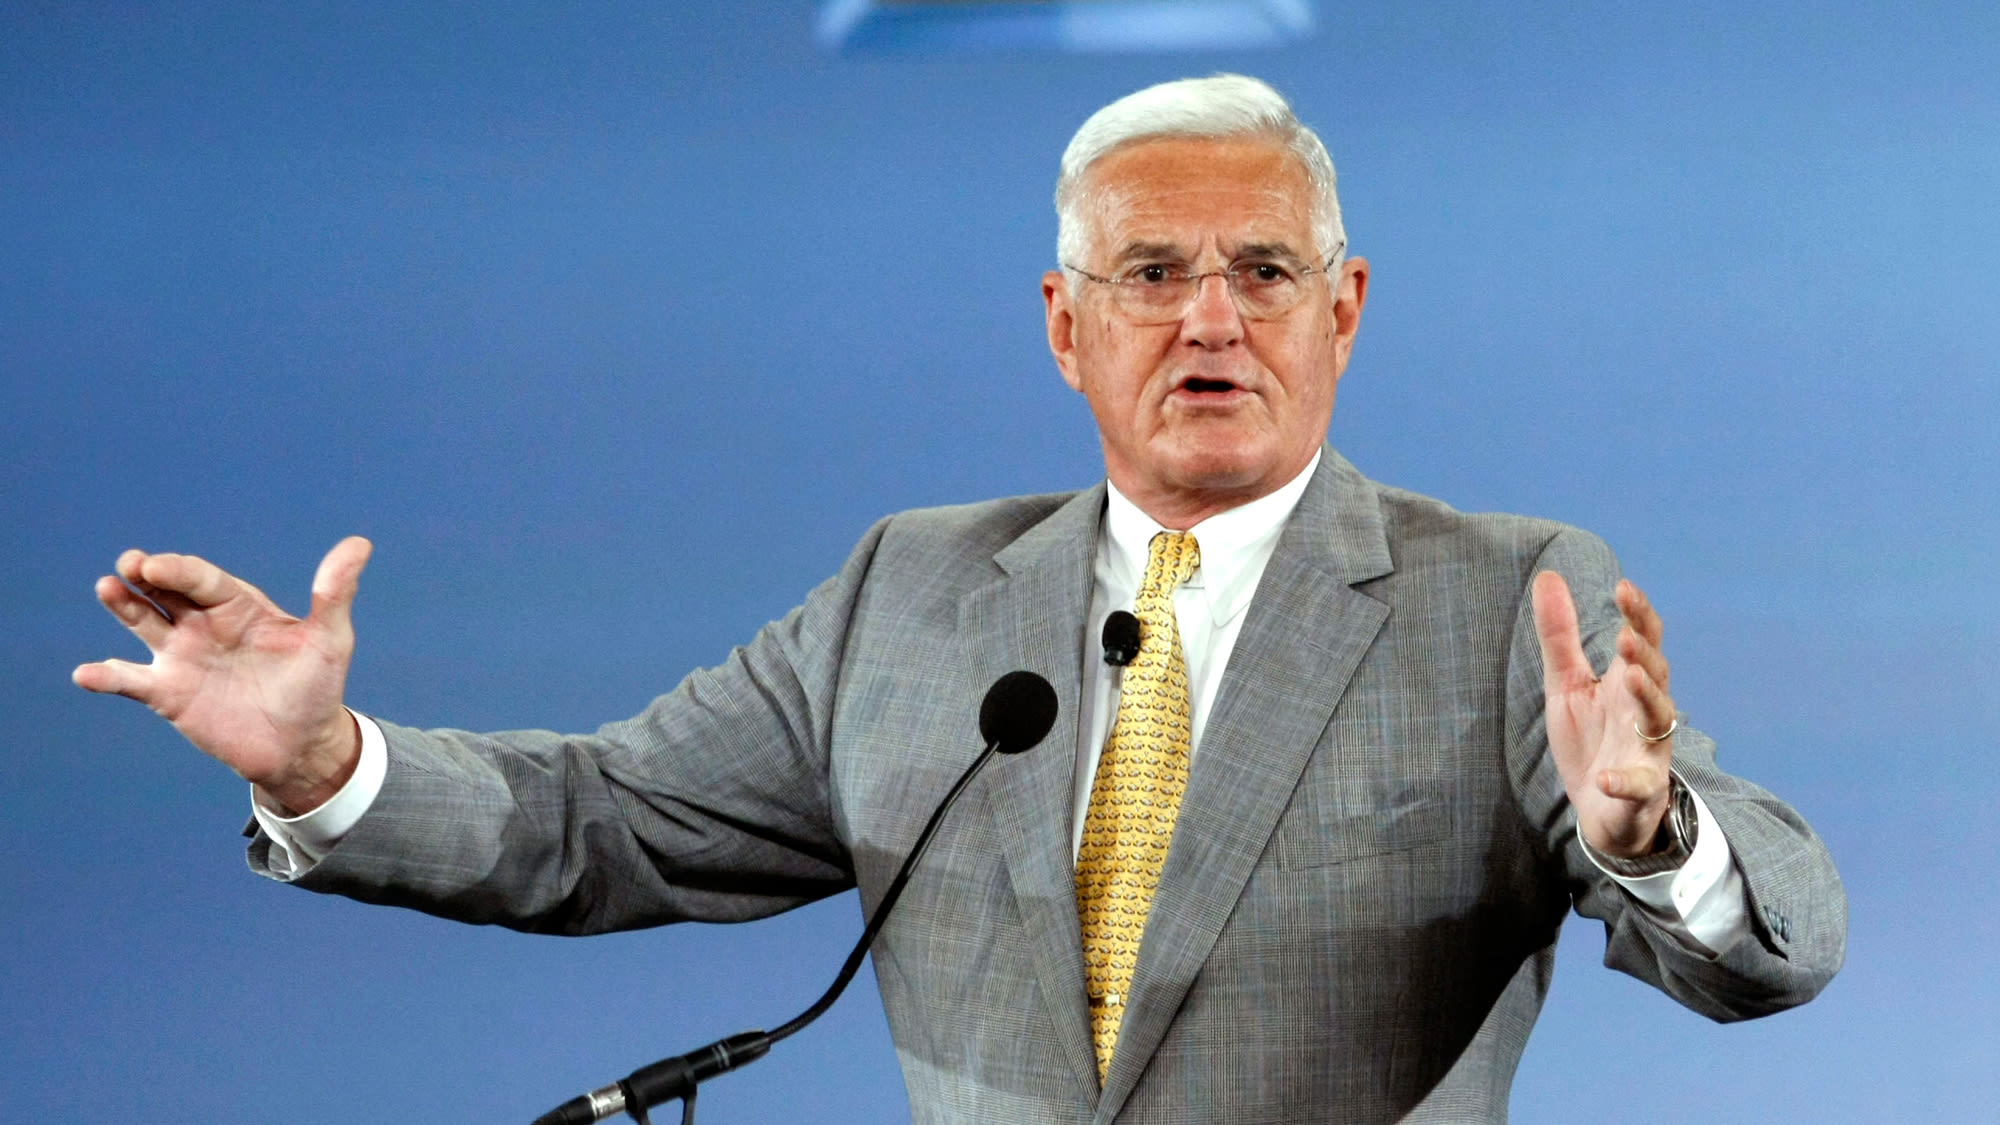 Ex-GM govt Bob Lutz lastly inspired by Elon Musk and Tesla